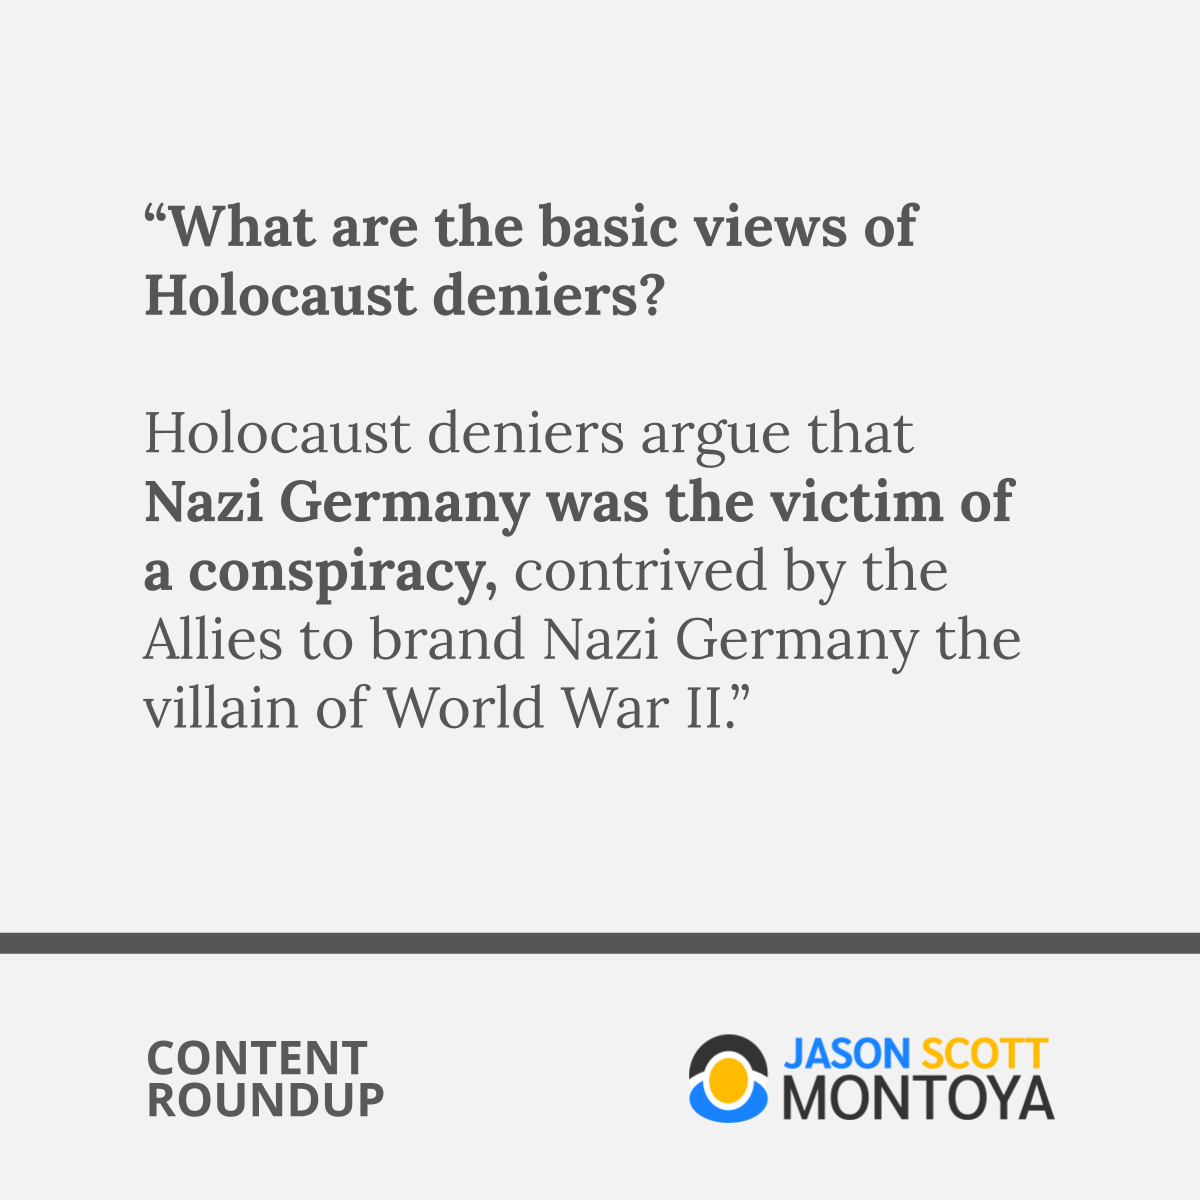 “What are the basic views of Holocaust deniers?  Holocaust deniers argue that Nazi Germany was the victim of a conspiracy, contrived by the Allies to brand Nazi Germany the villain of World War II.”